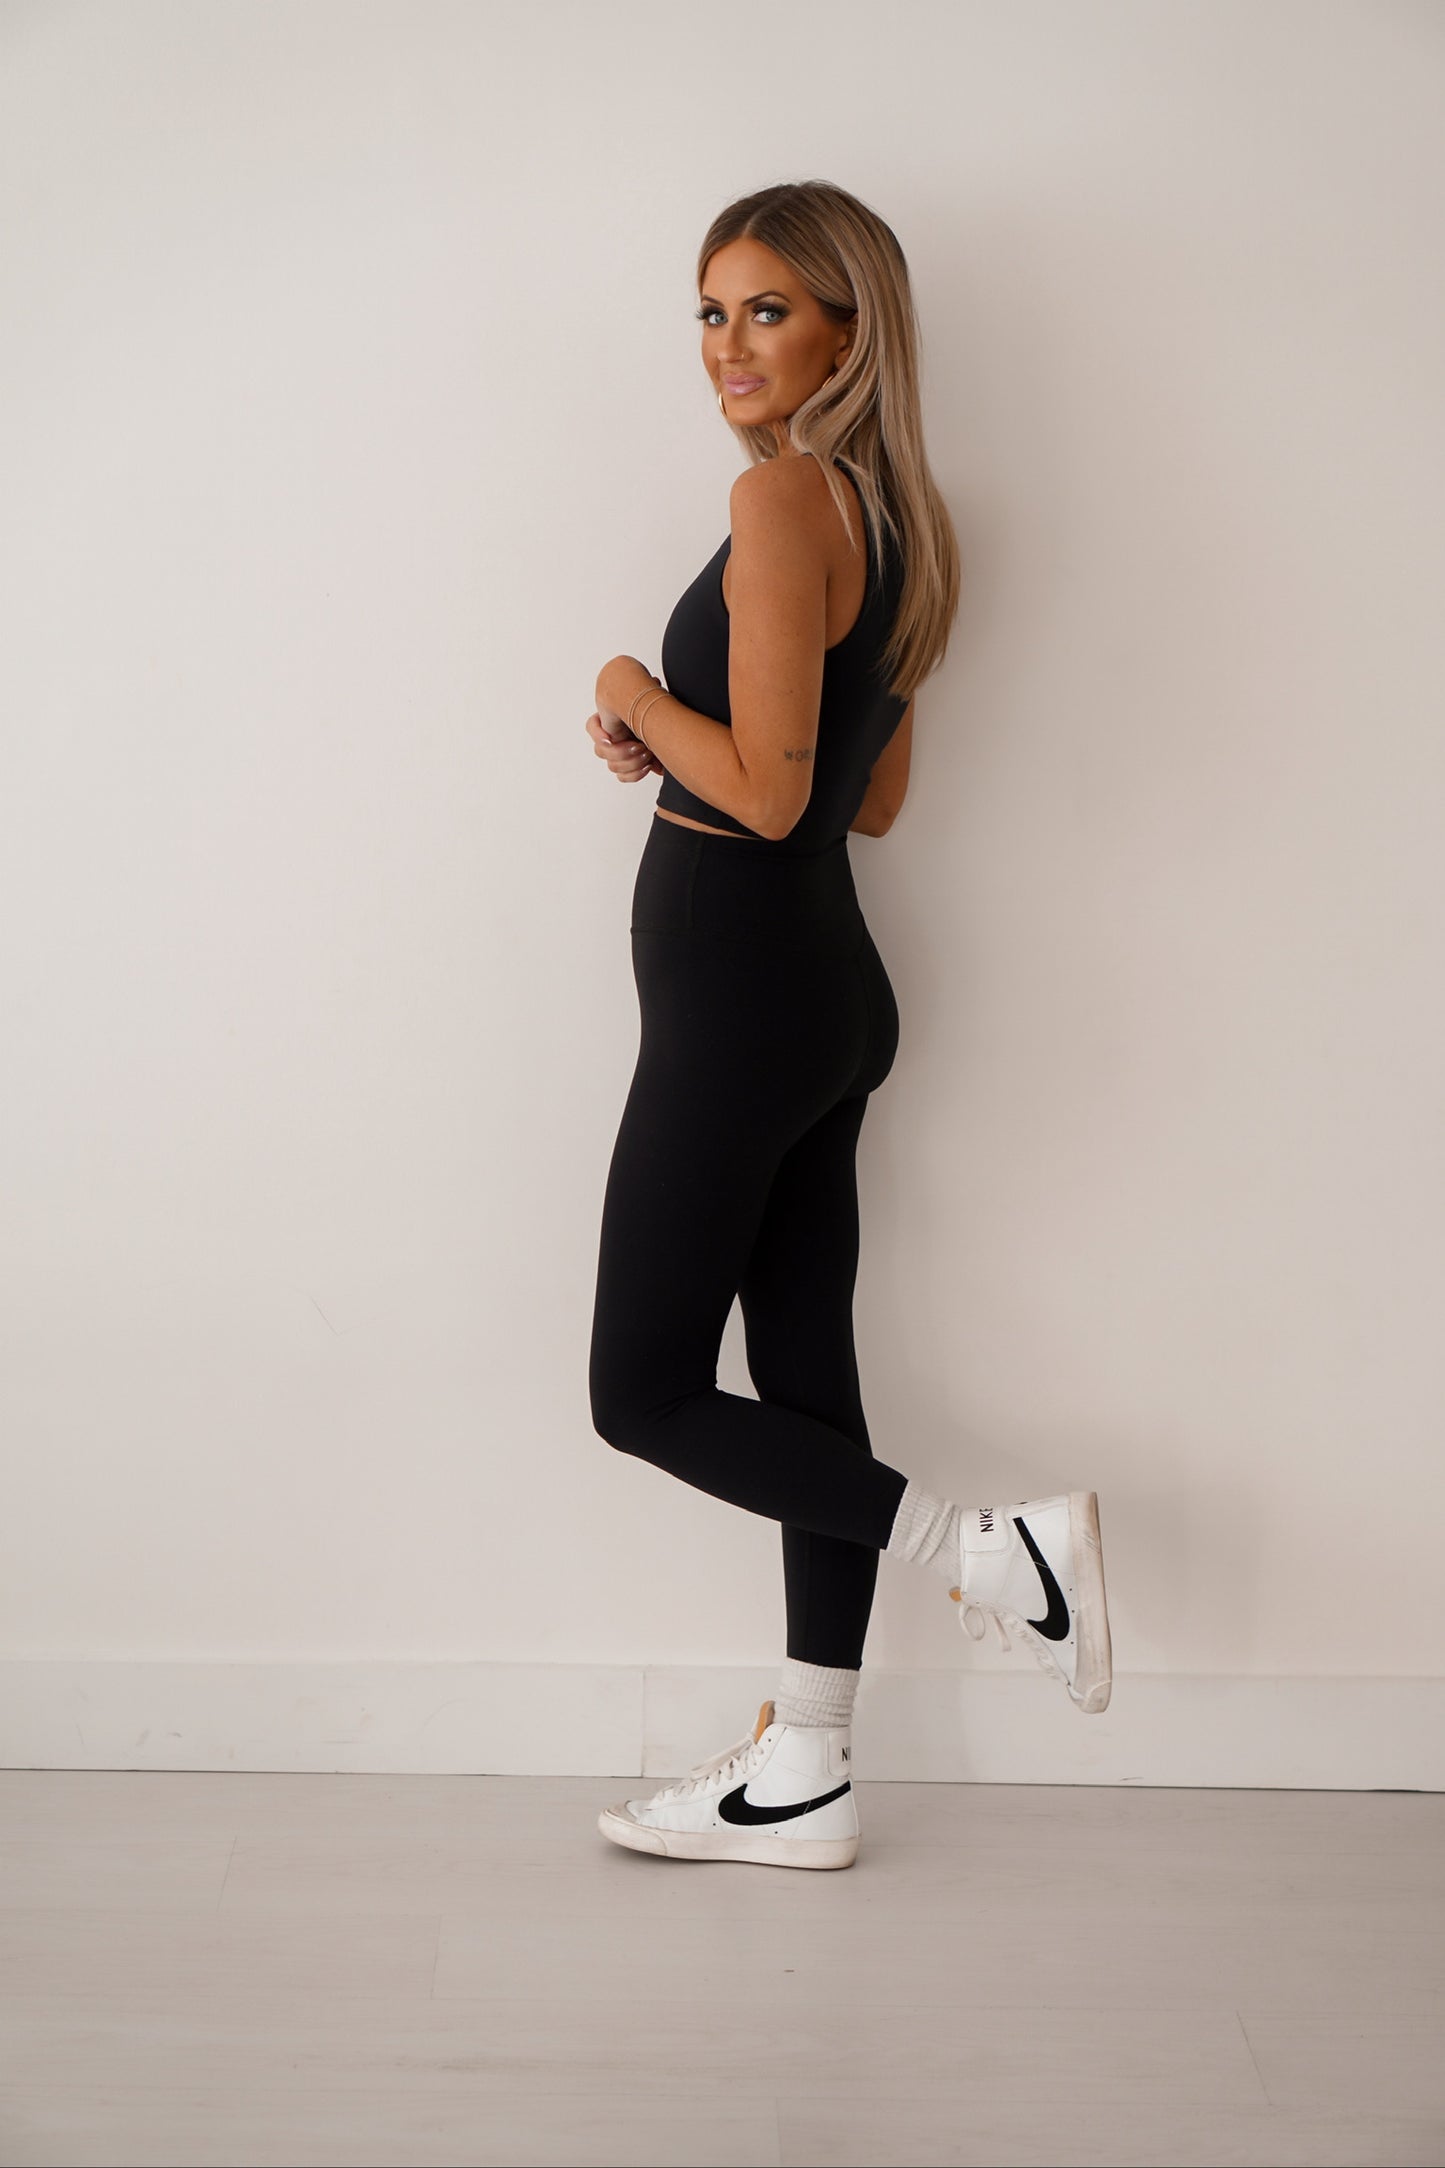 Girl standing in front of white wall showing side view of black workout tank. 